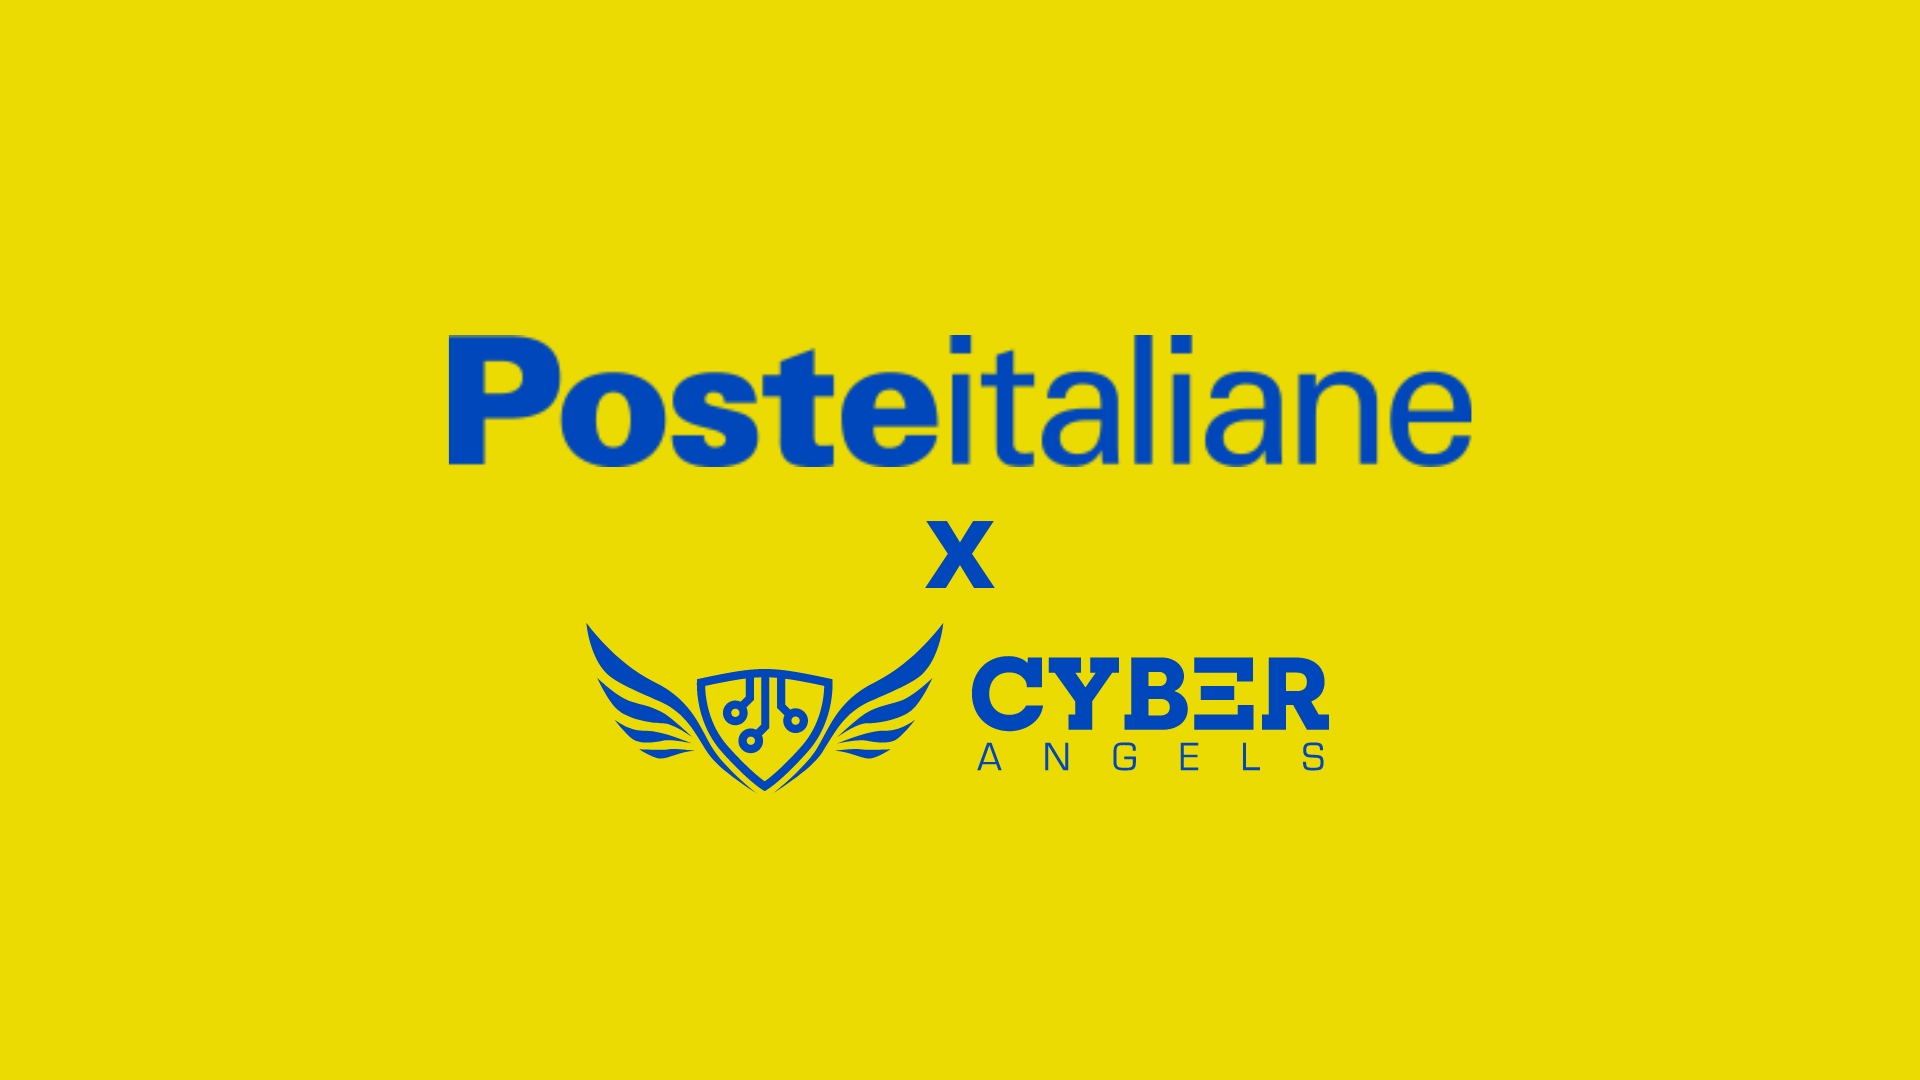 Poste Italiane and Cyberangels: A Collaboration for Italy's Digital Future